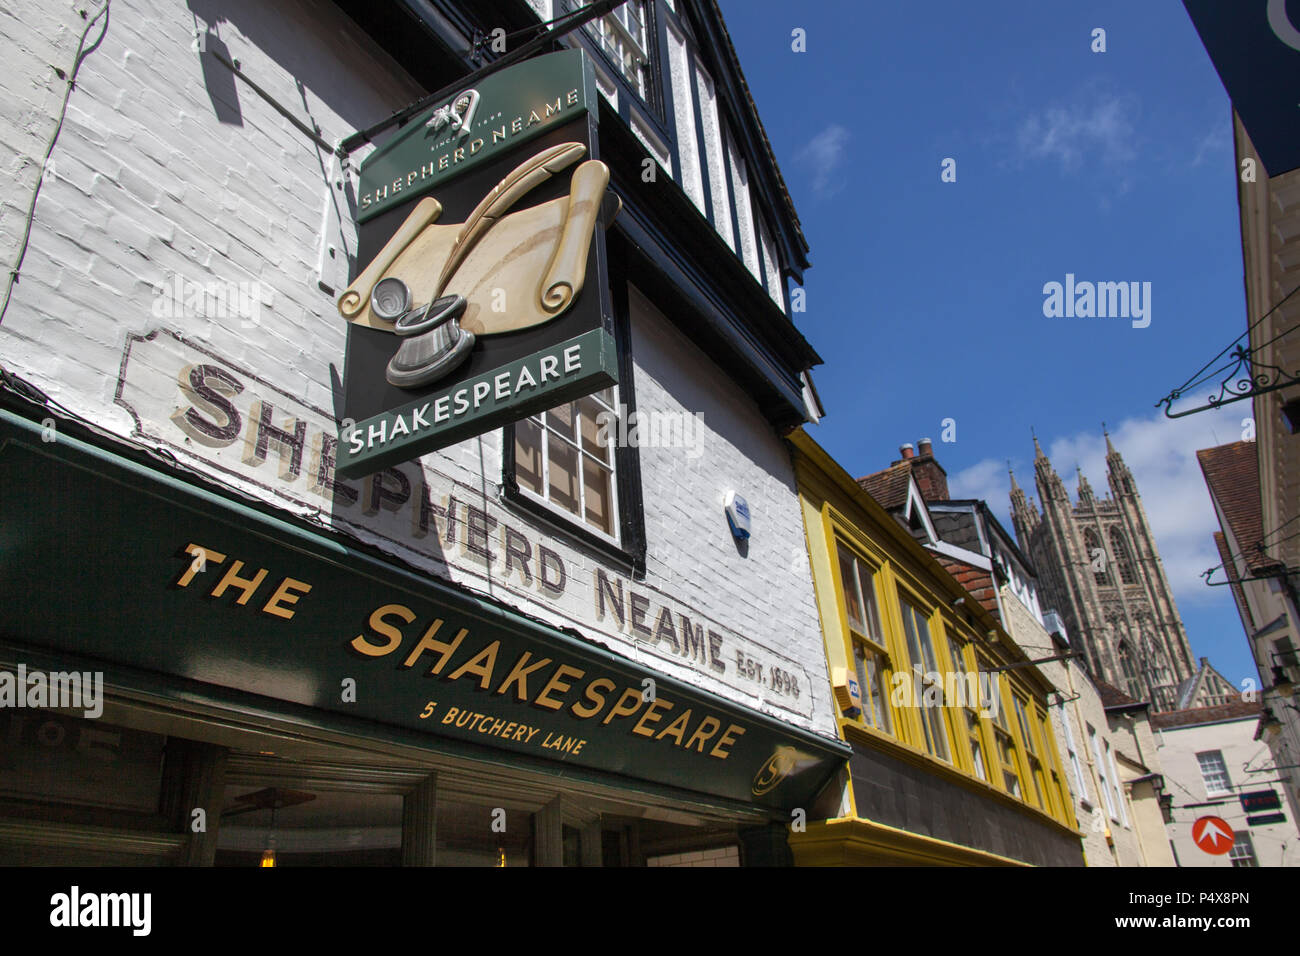 City of Canterbury, England. Shop and pub fronts on Canterbury’s Butchery Lane, with Canterbury Cathedral’s Bell Harry Tower in the background. Stock Photo